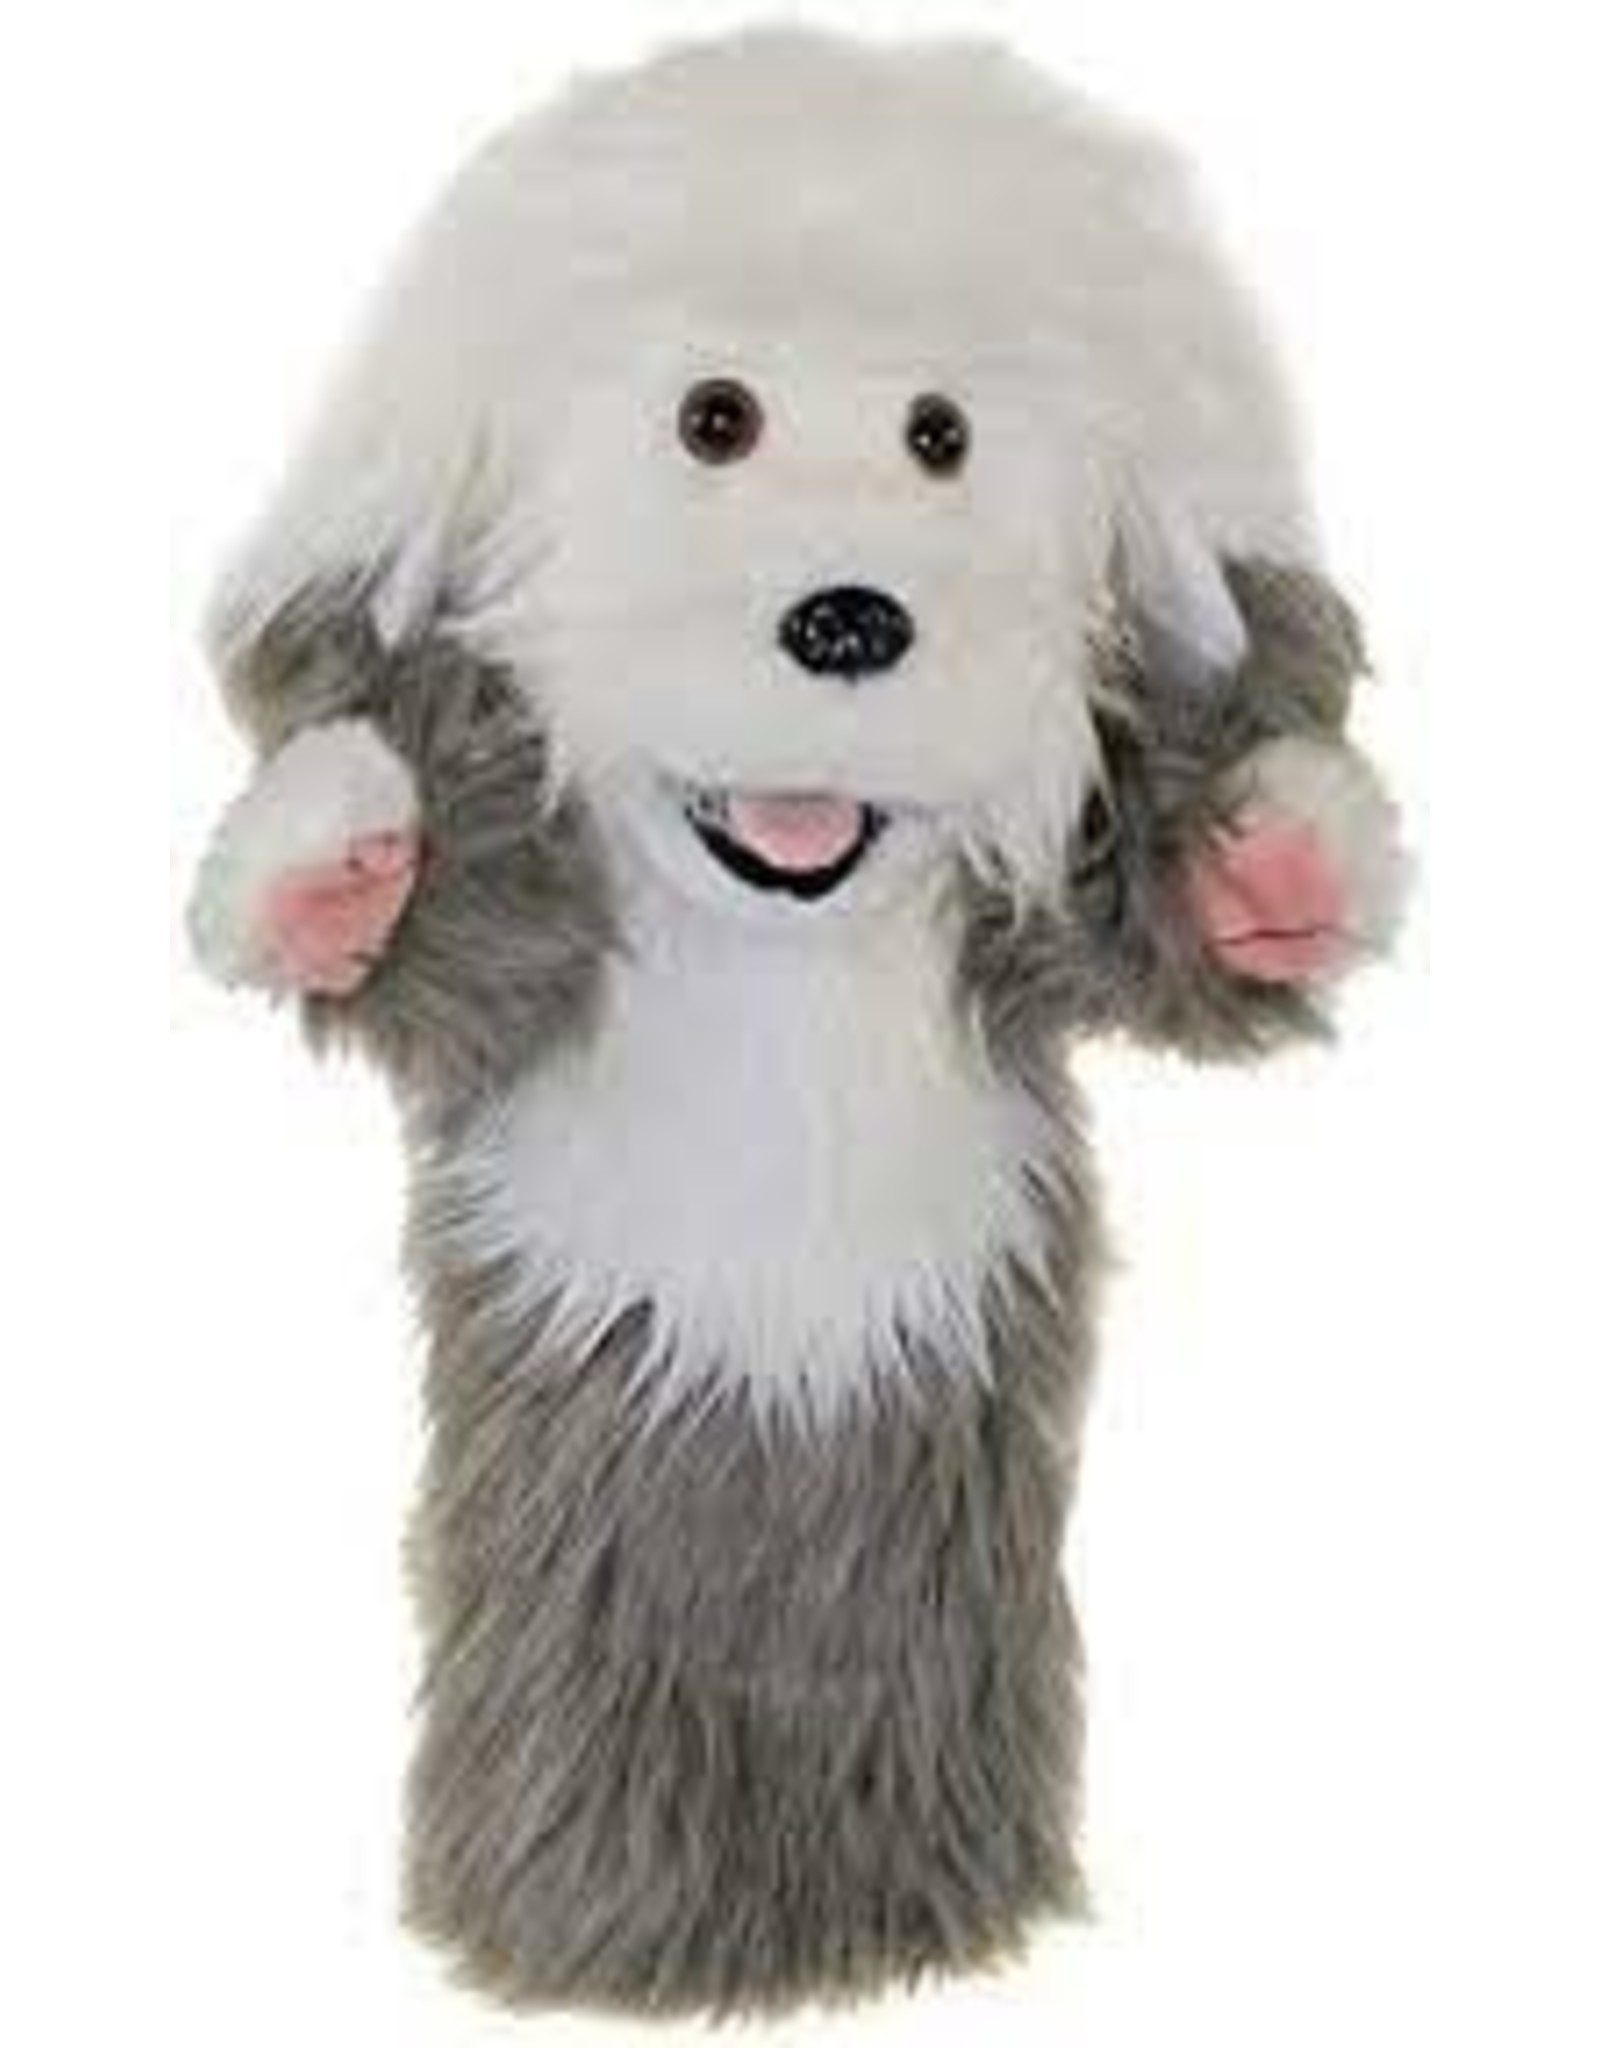 16" Long-Sleeved Glove Puppets: Old English Sheepdog